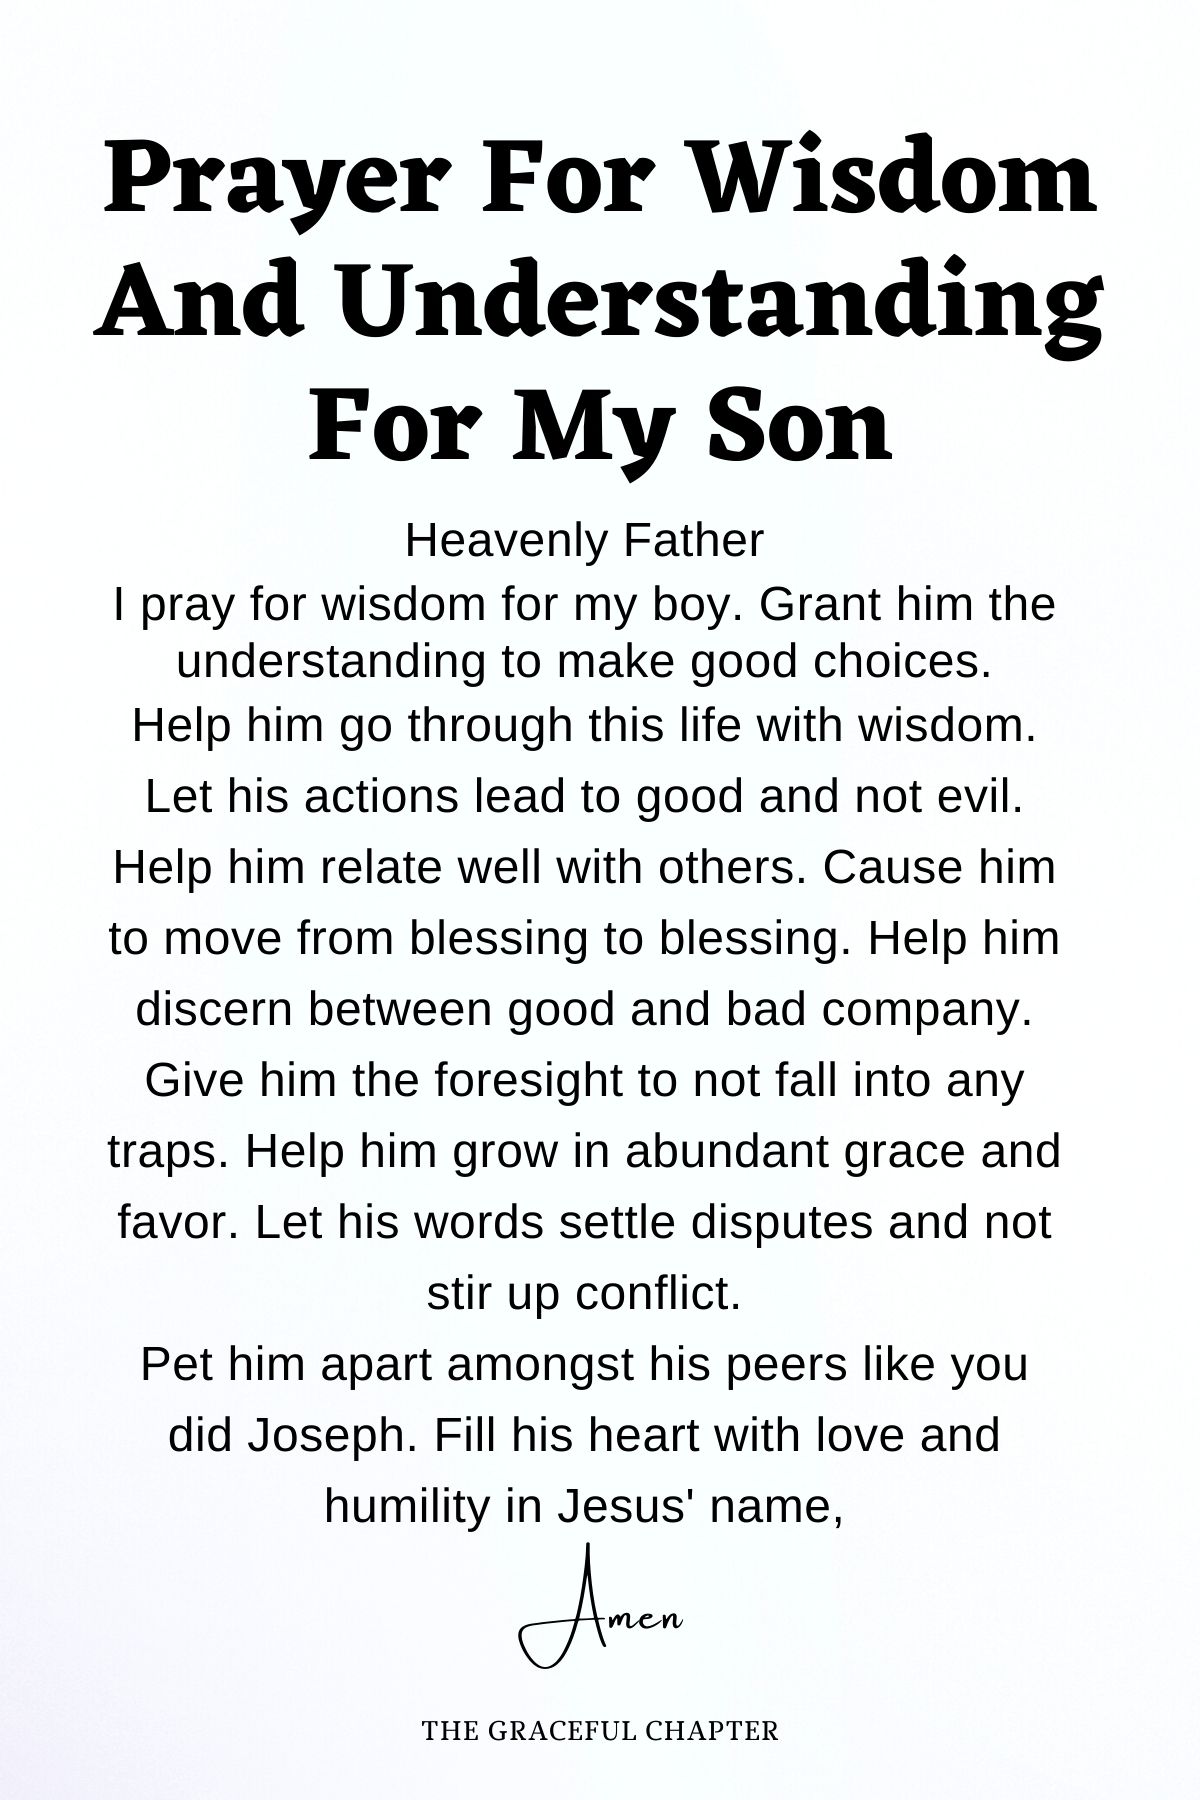 Prayer for wisdom and understanding for my son